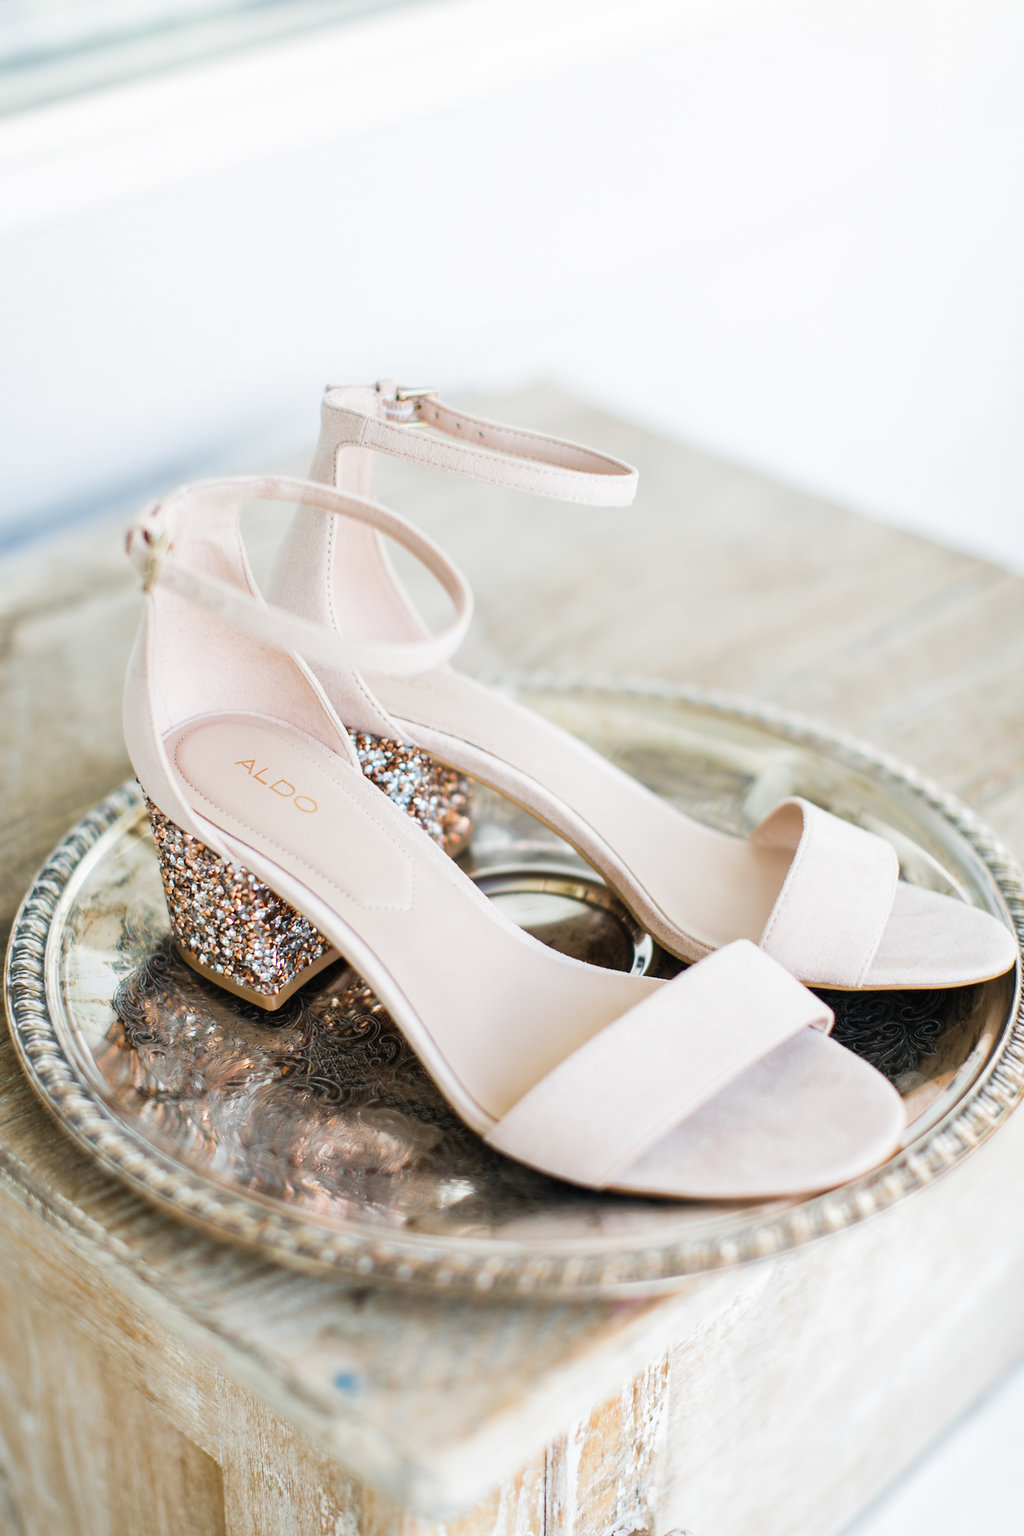 How amazing are these heels and it’s touch of glitter?